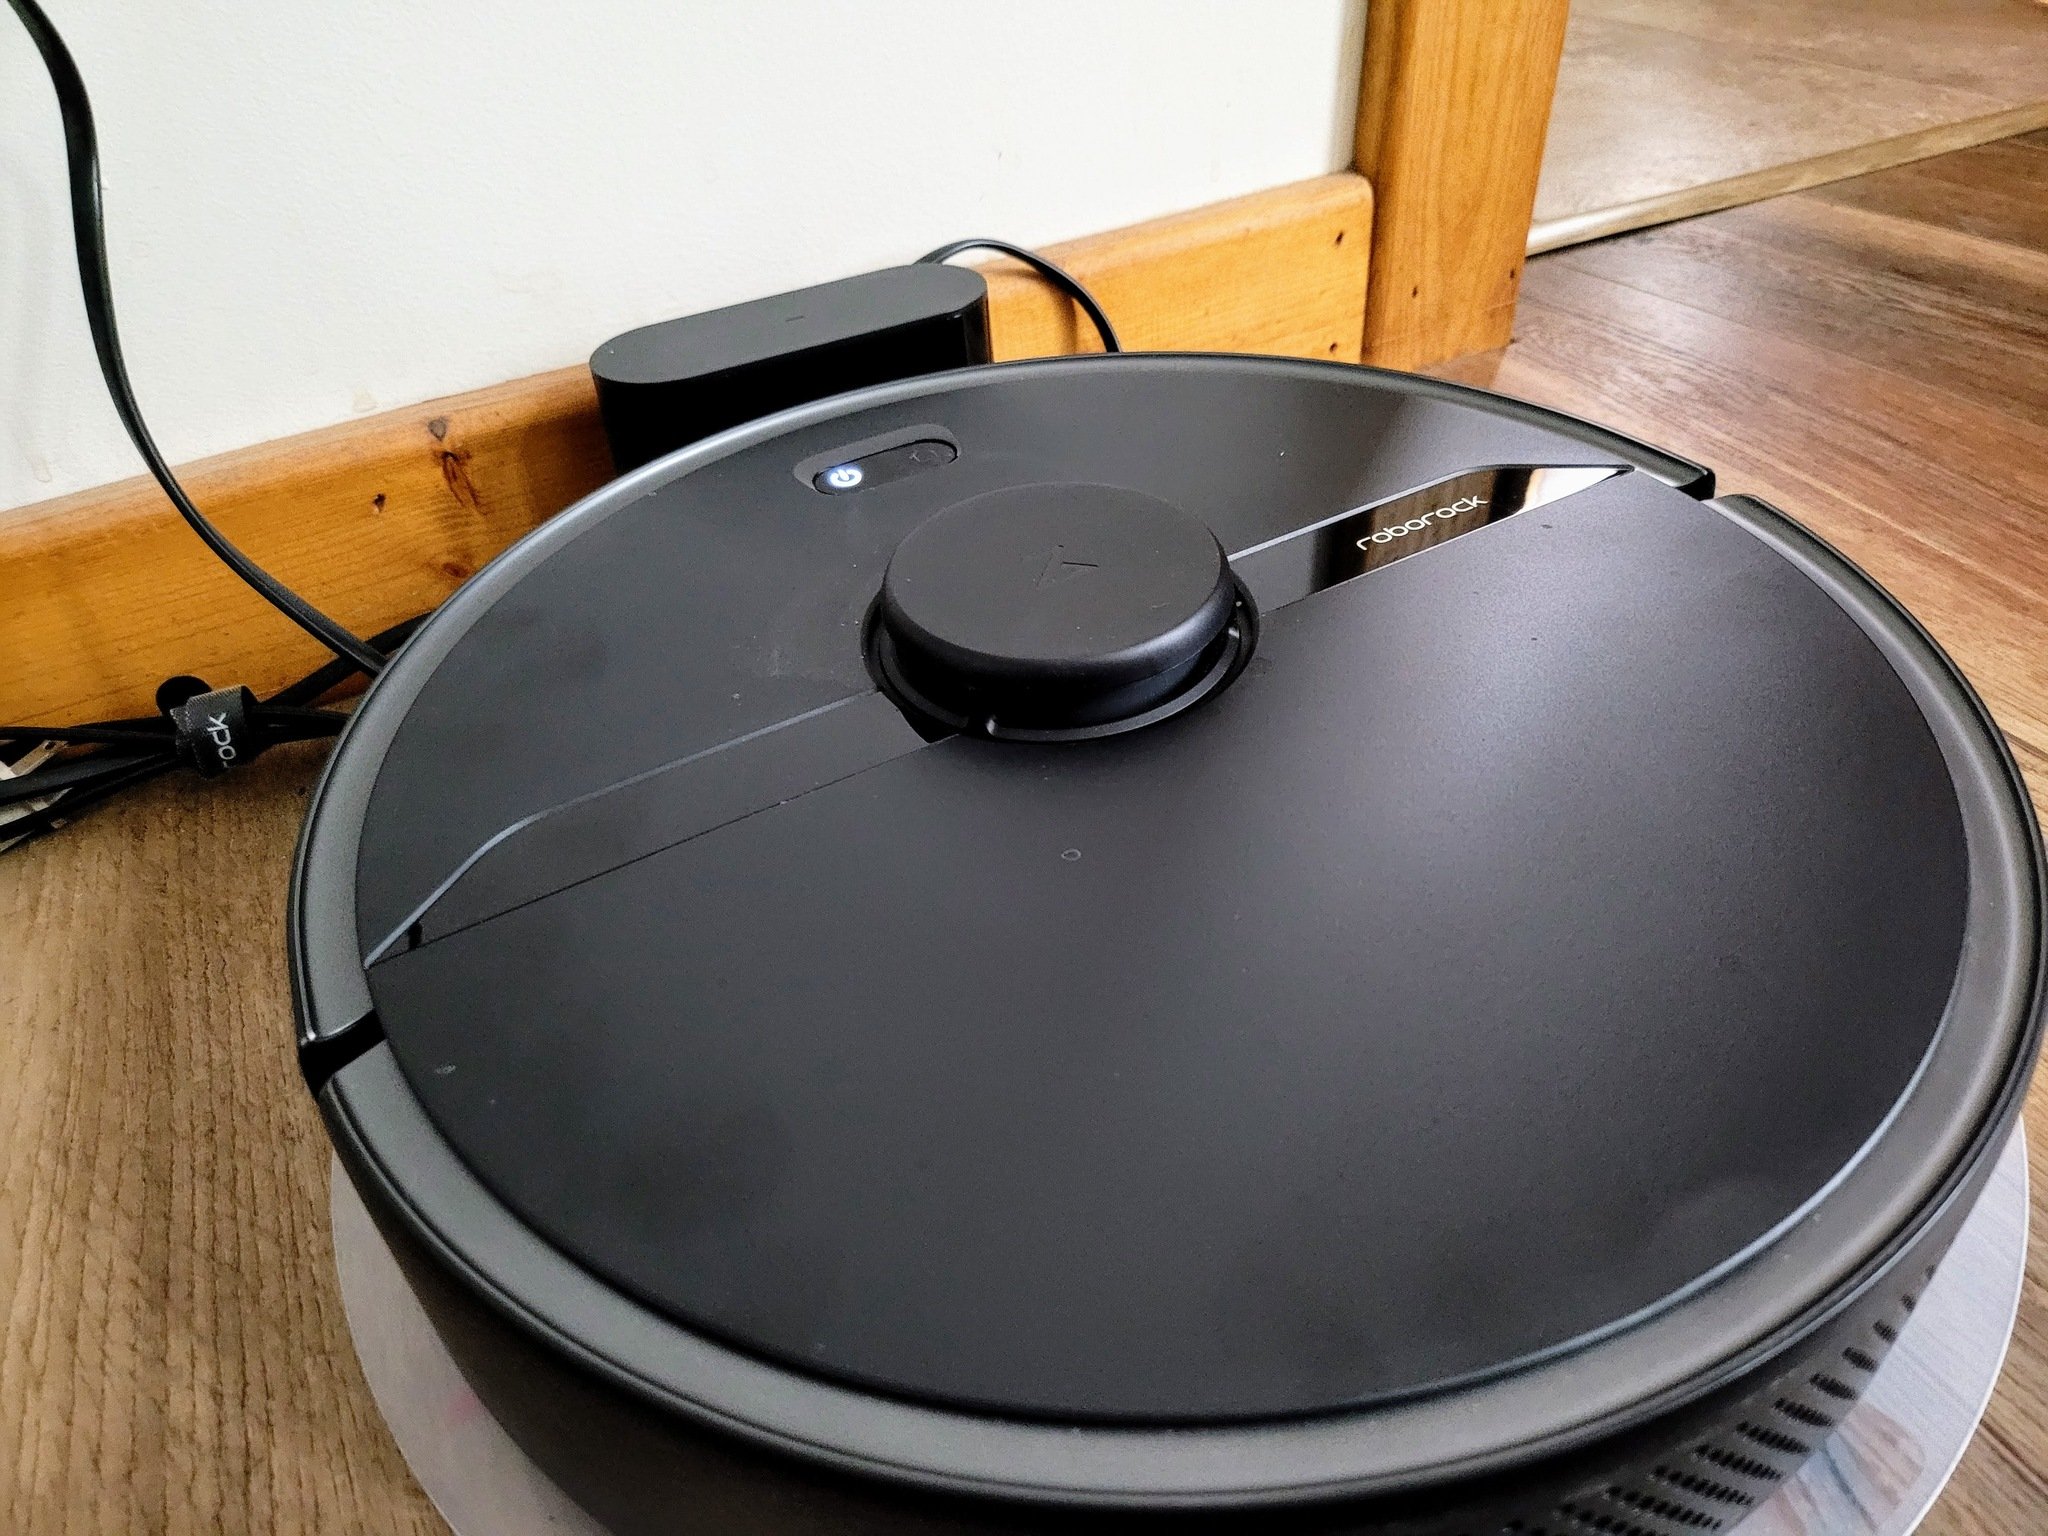 Roborock S6 Pure review: Helping save my rural home from filth